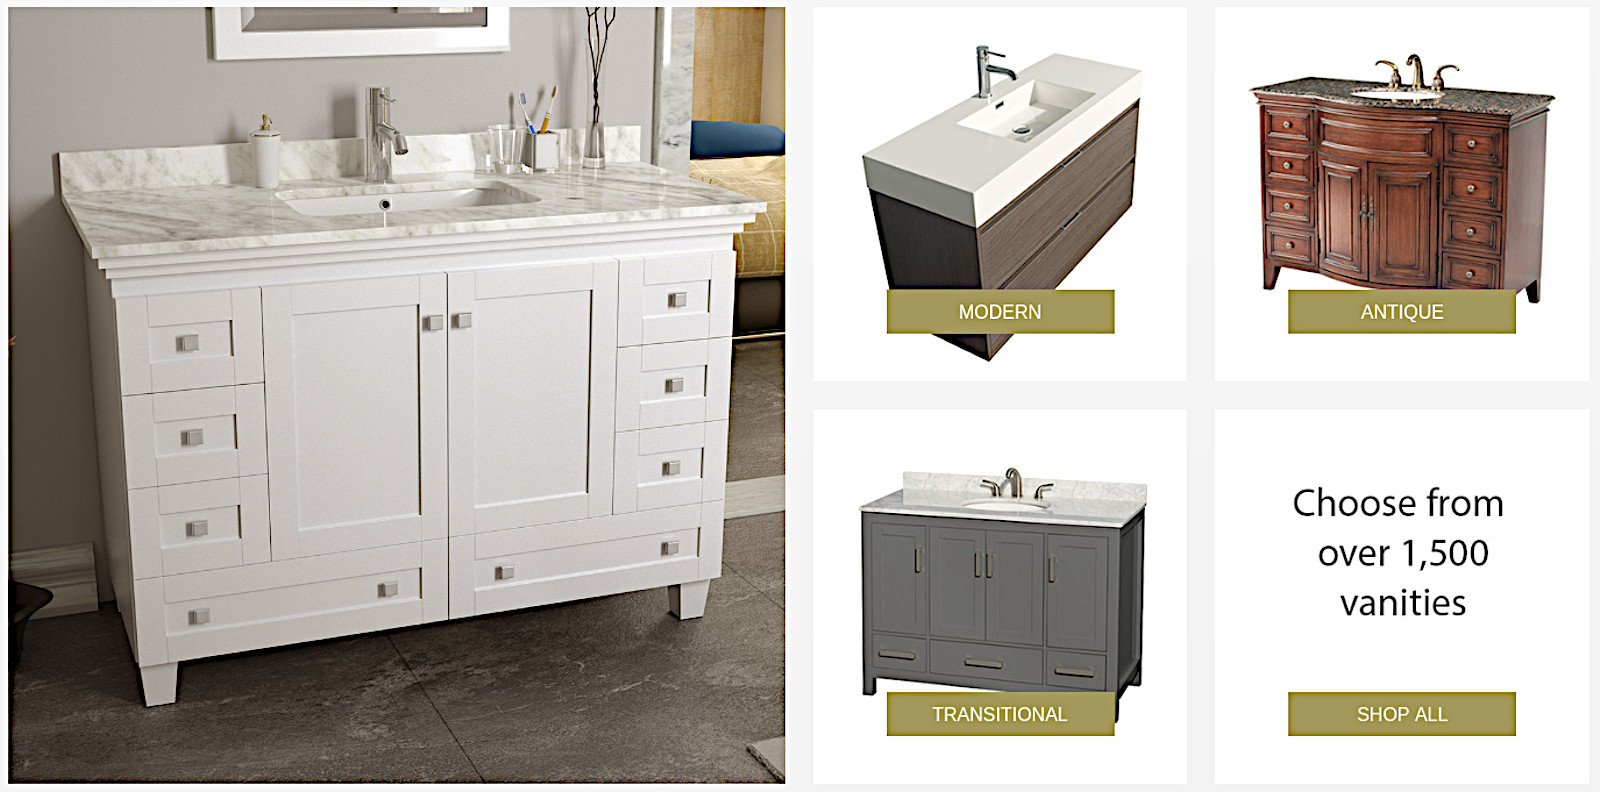 Clearance modern antique transitional vanities